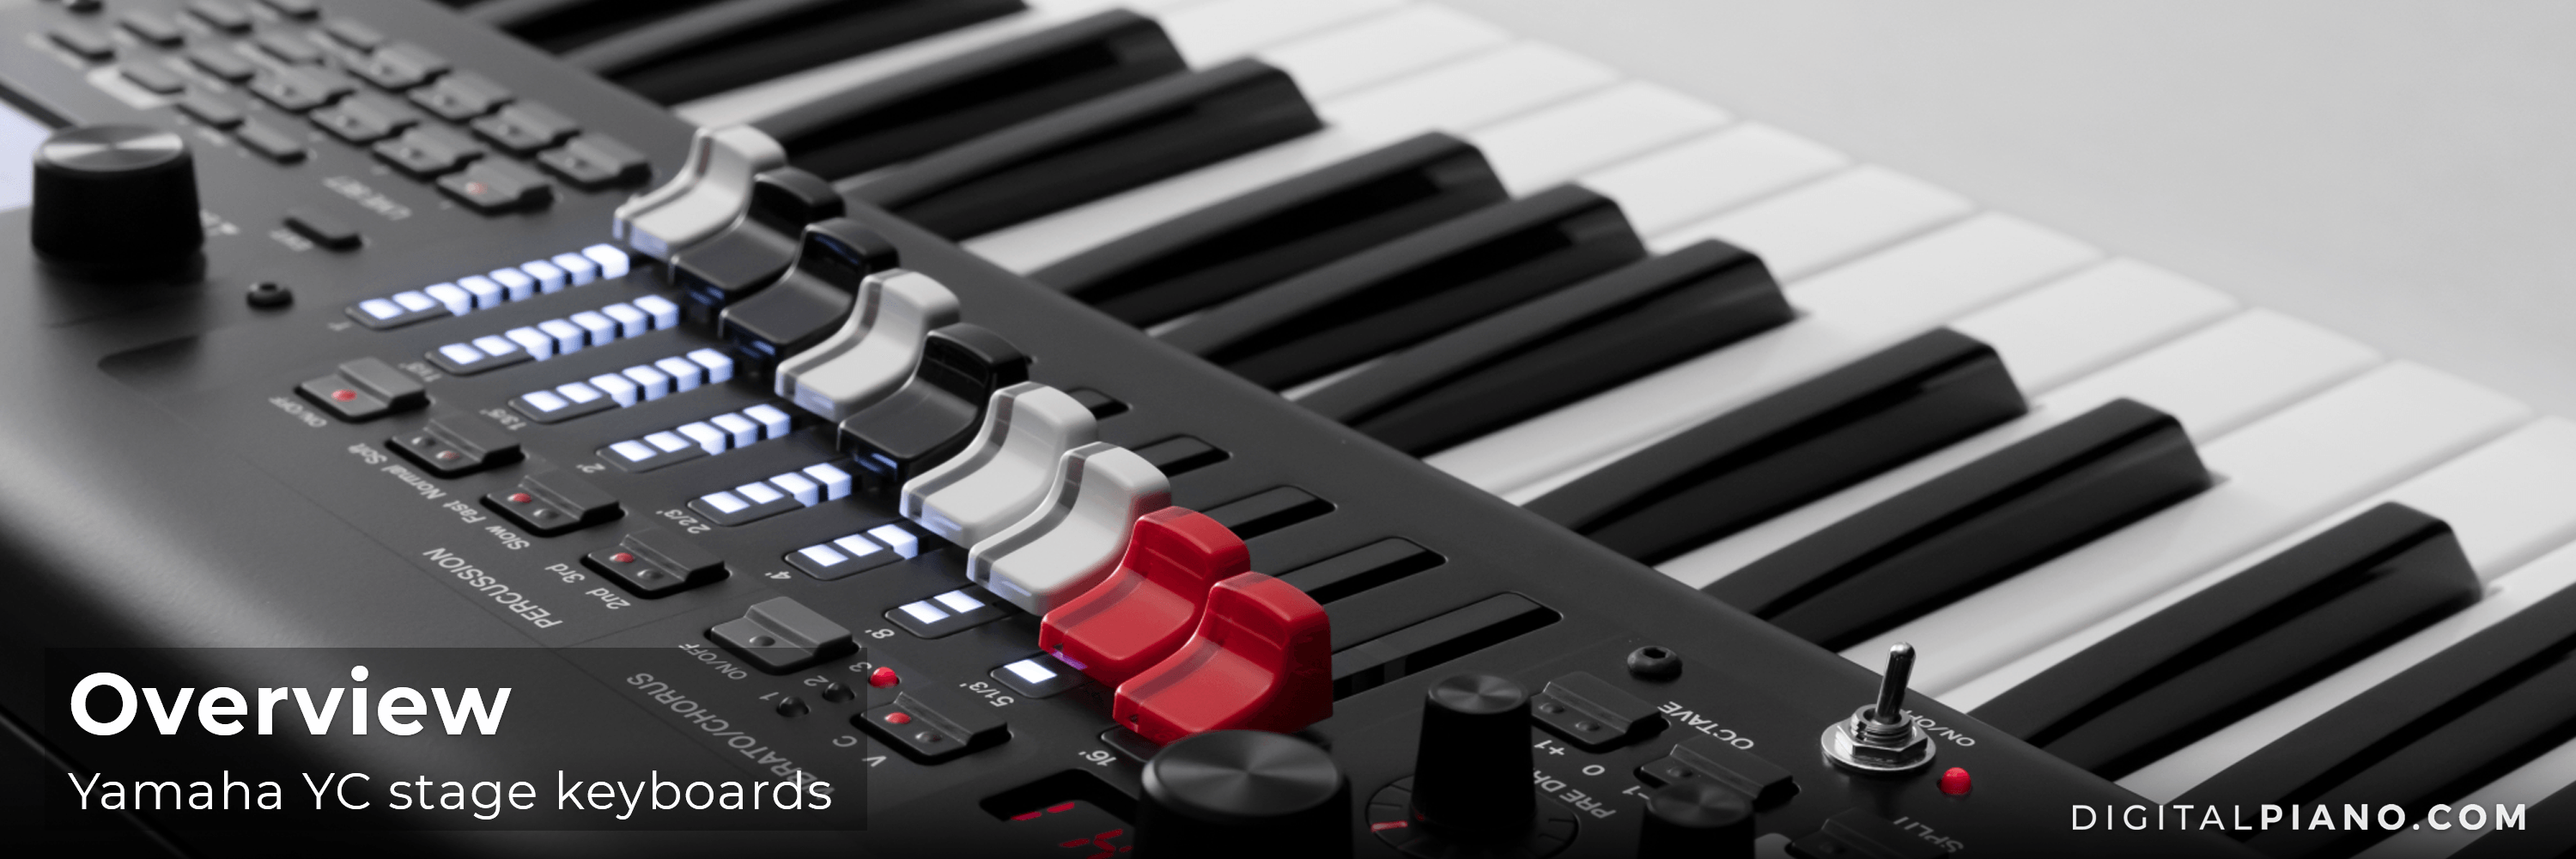 Overview - Yamaha YC stage keyboards